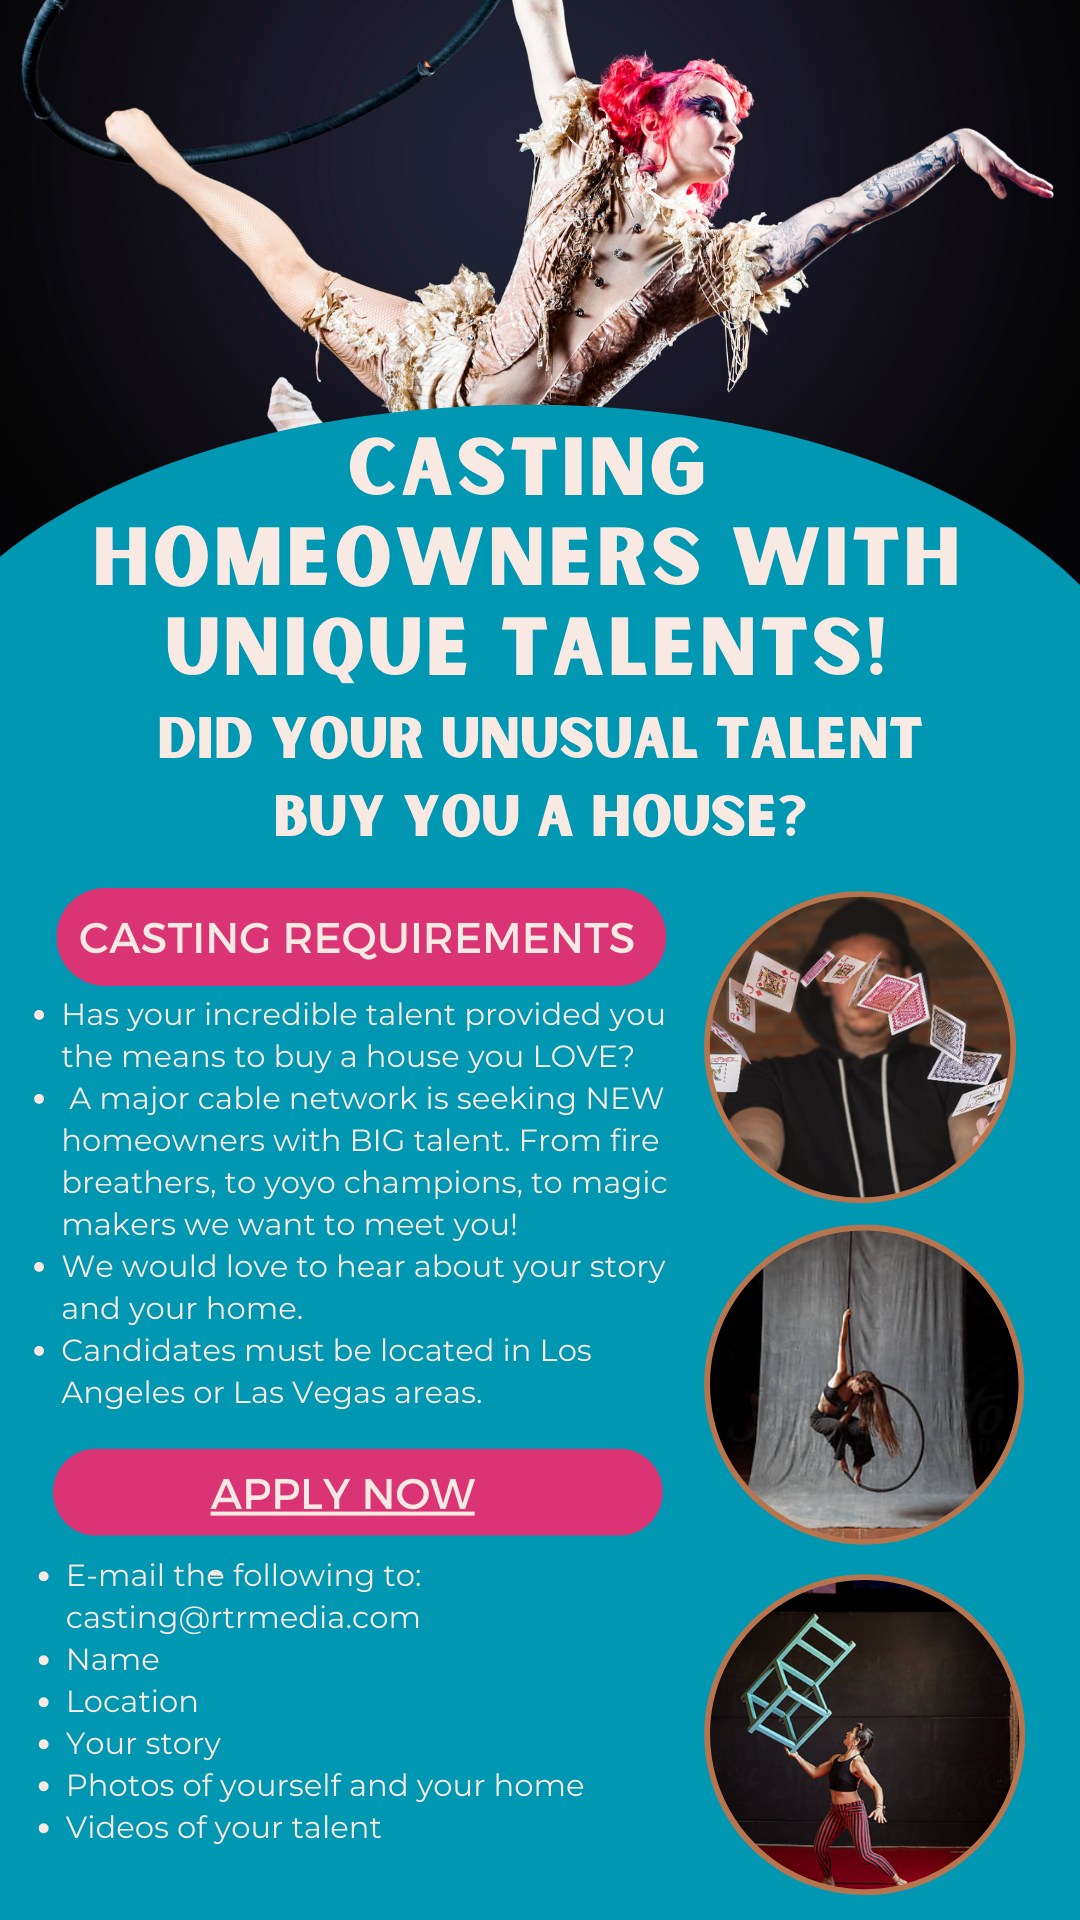 Casting Homeowners with Unique Talents in Los Angeles and Las Vegas